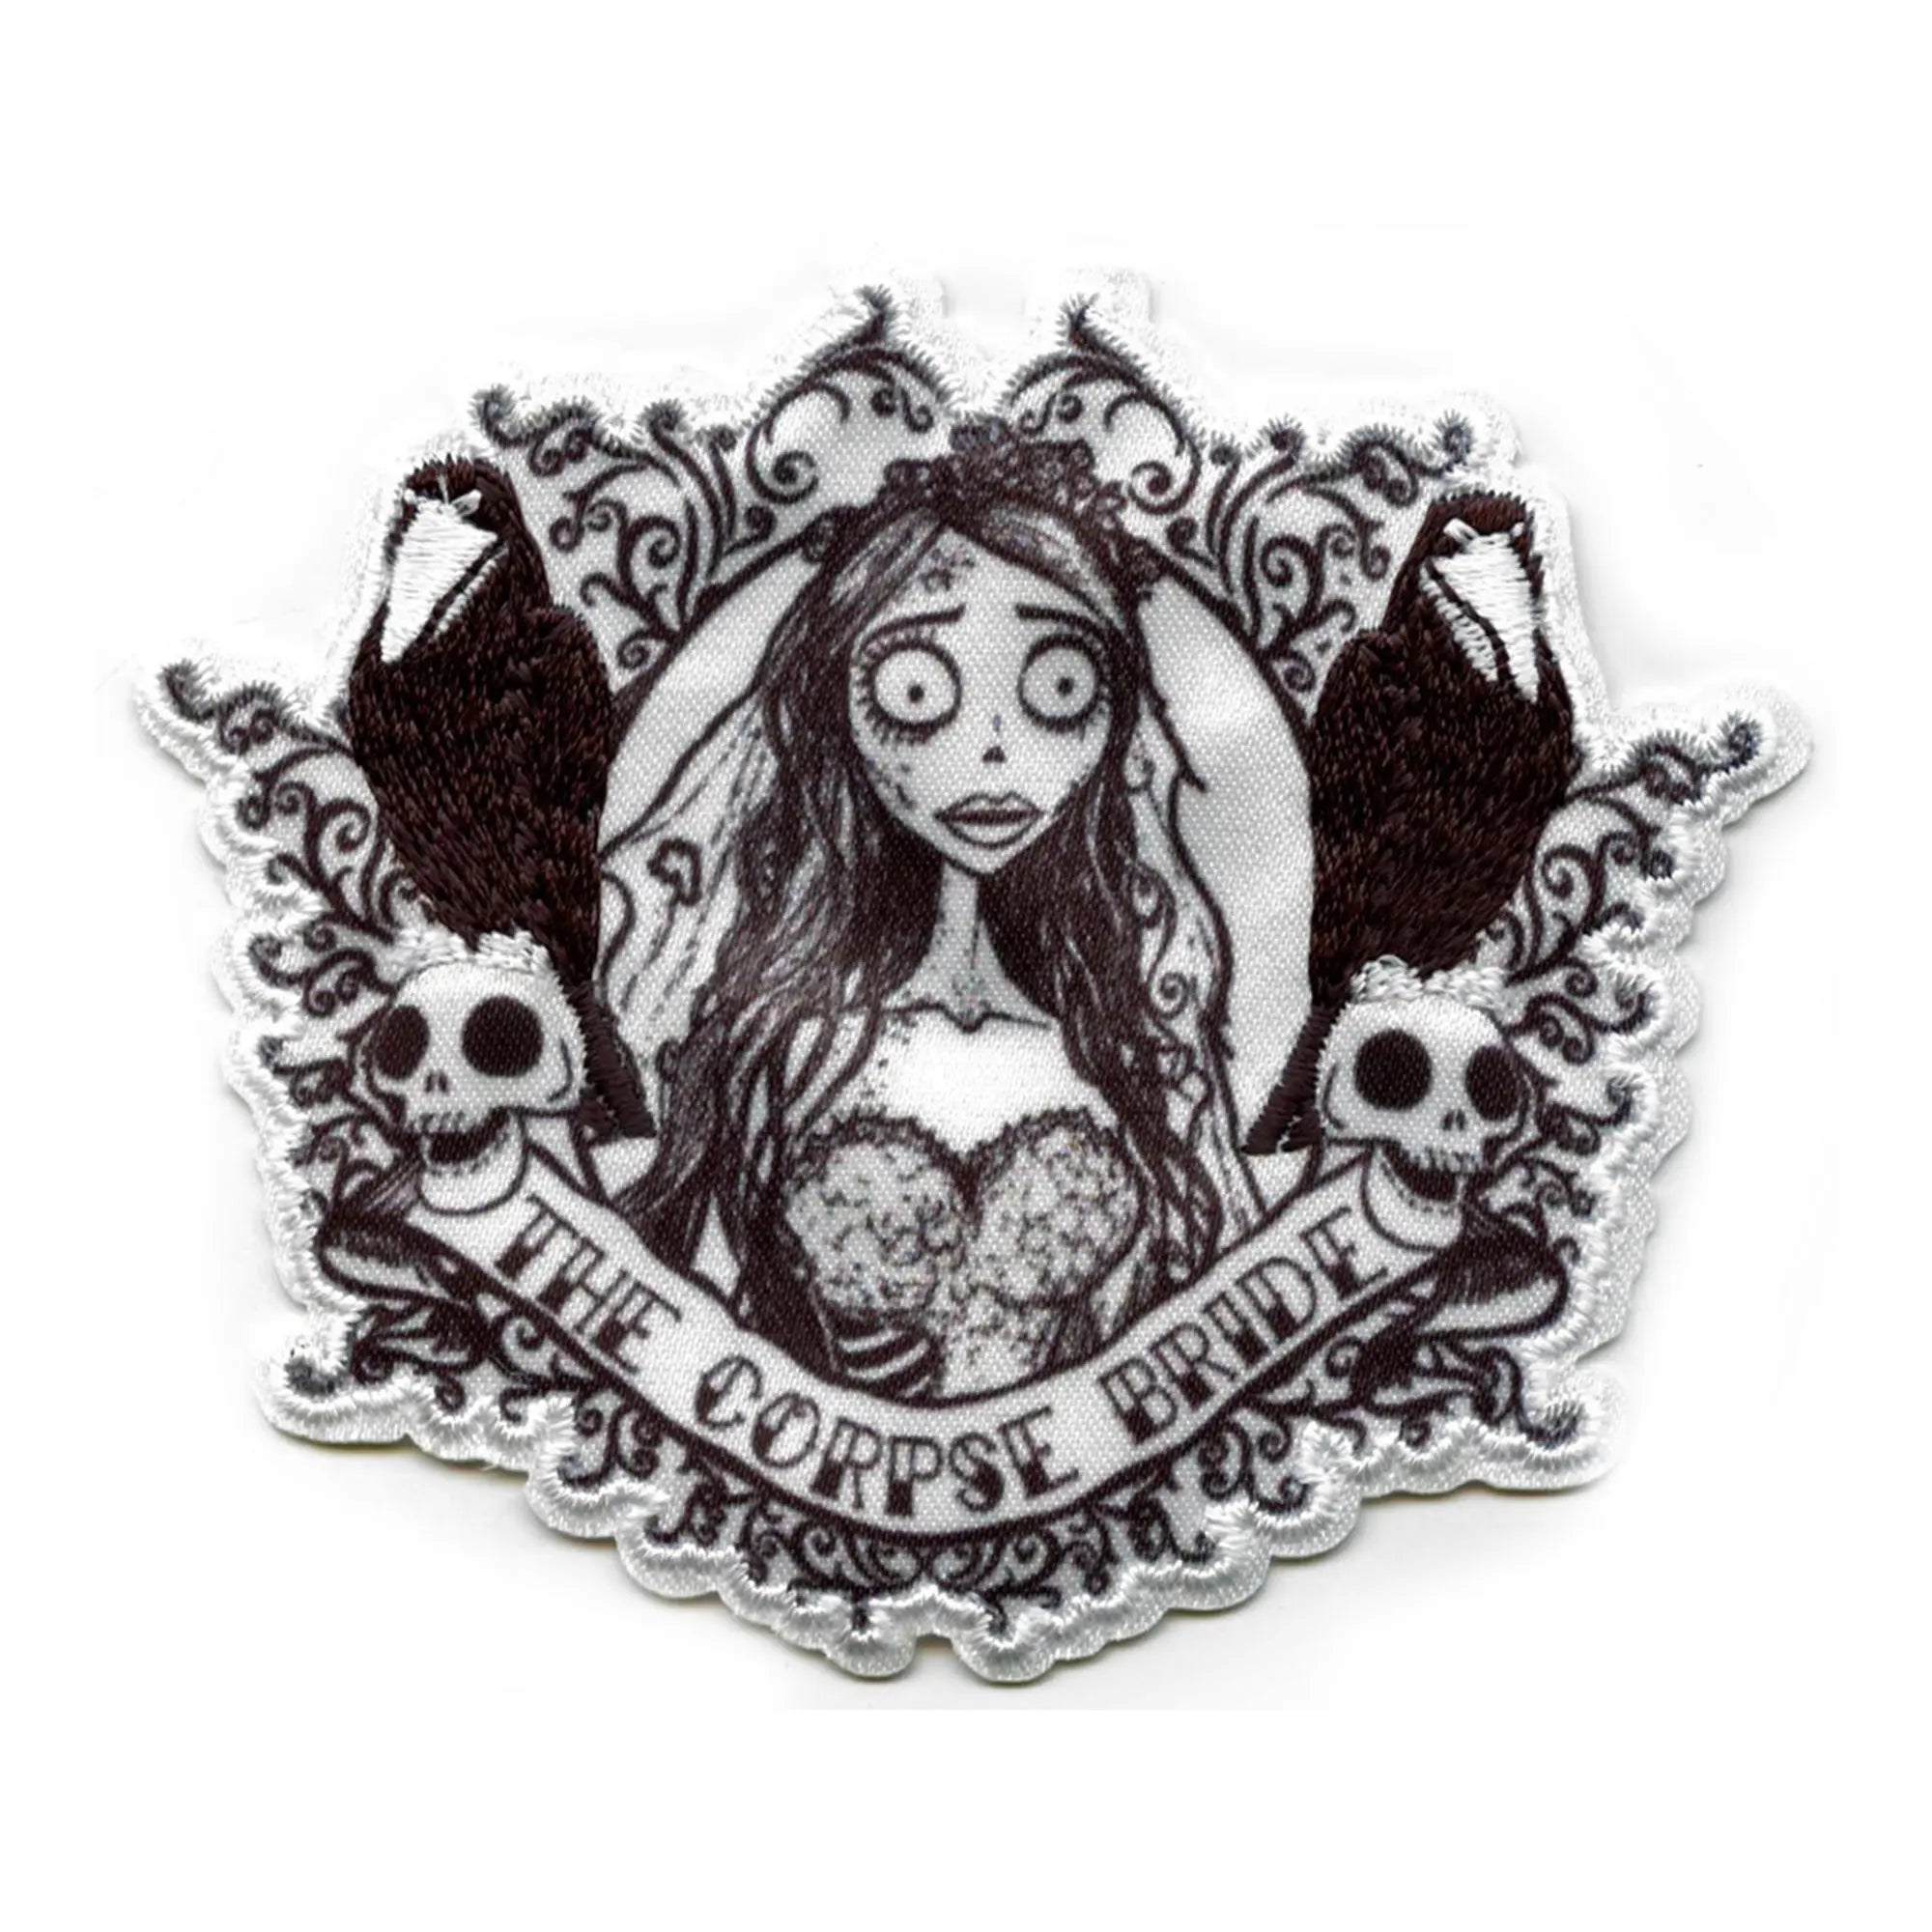 Corpse Bride – Patch Collection